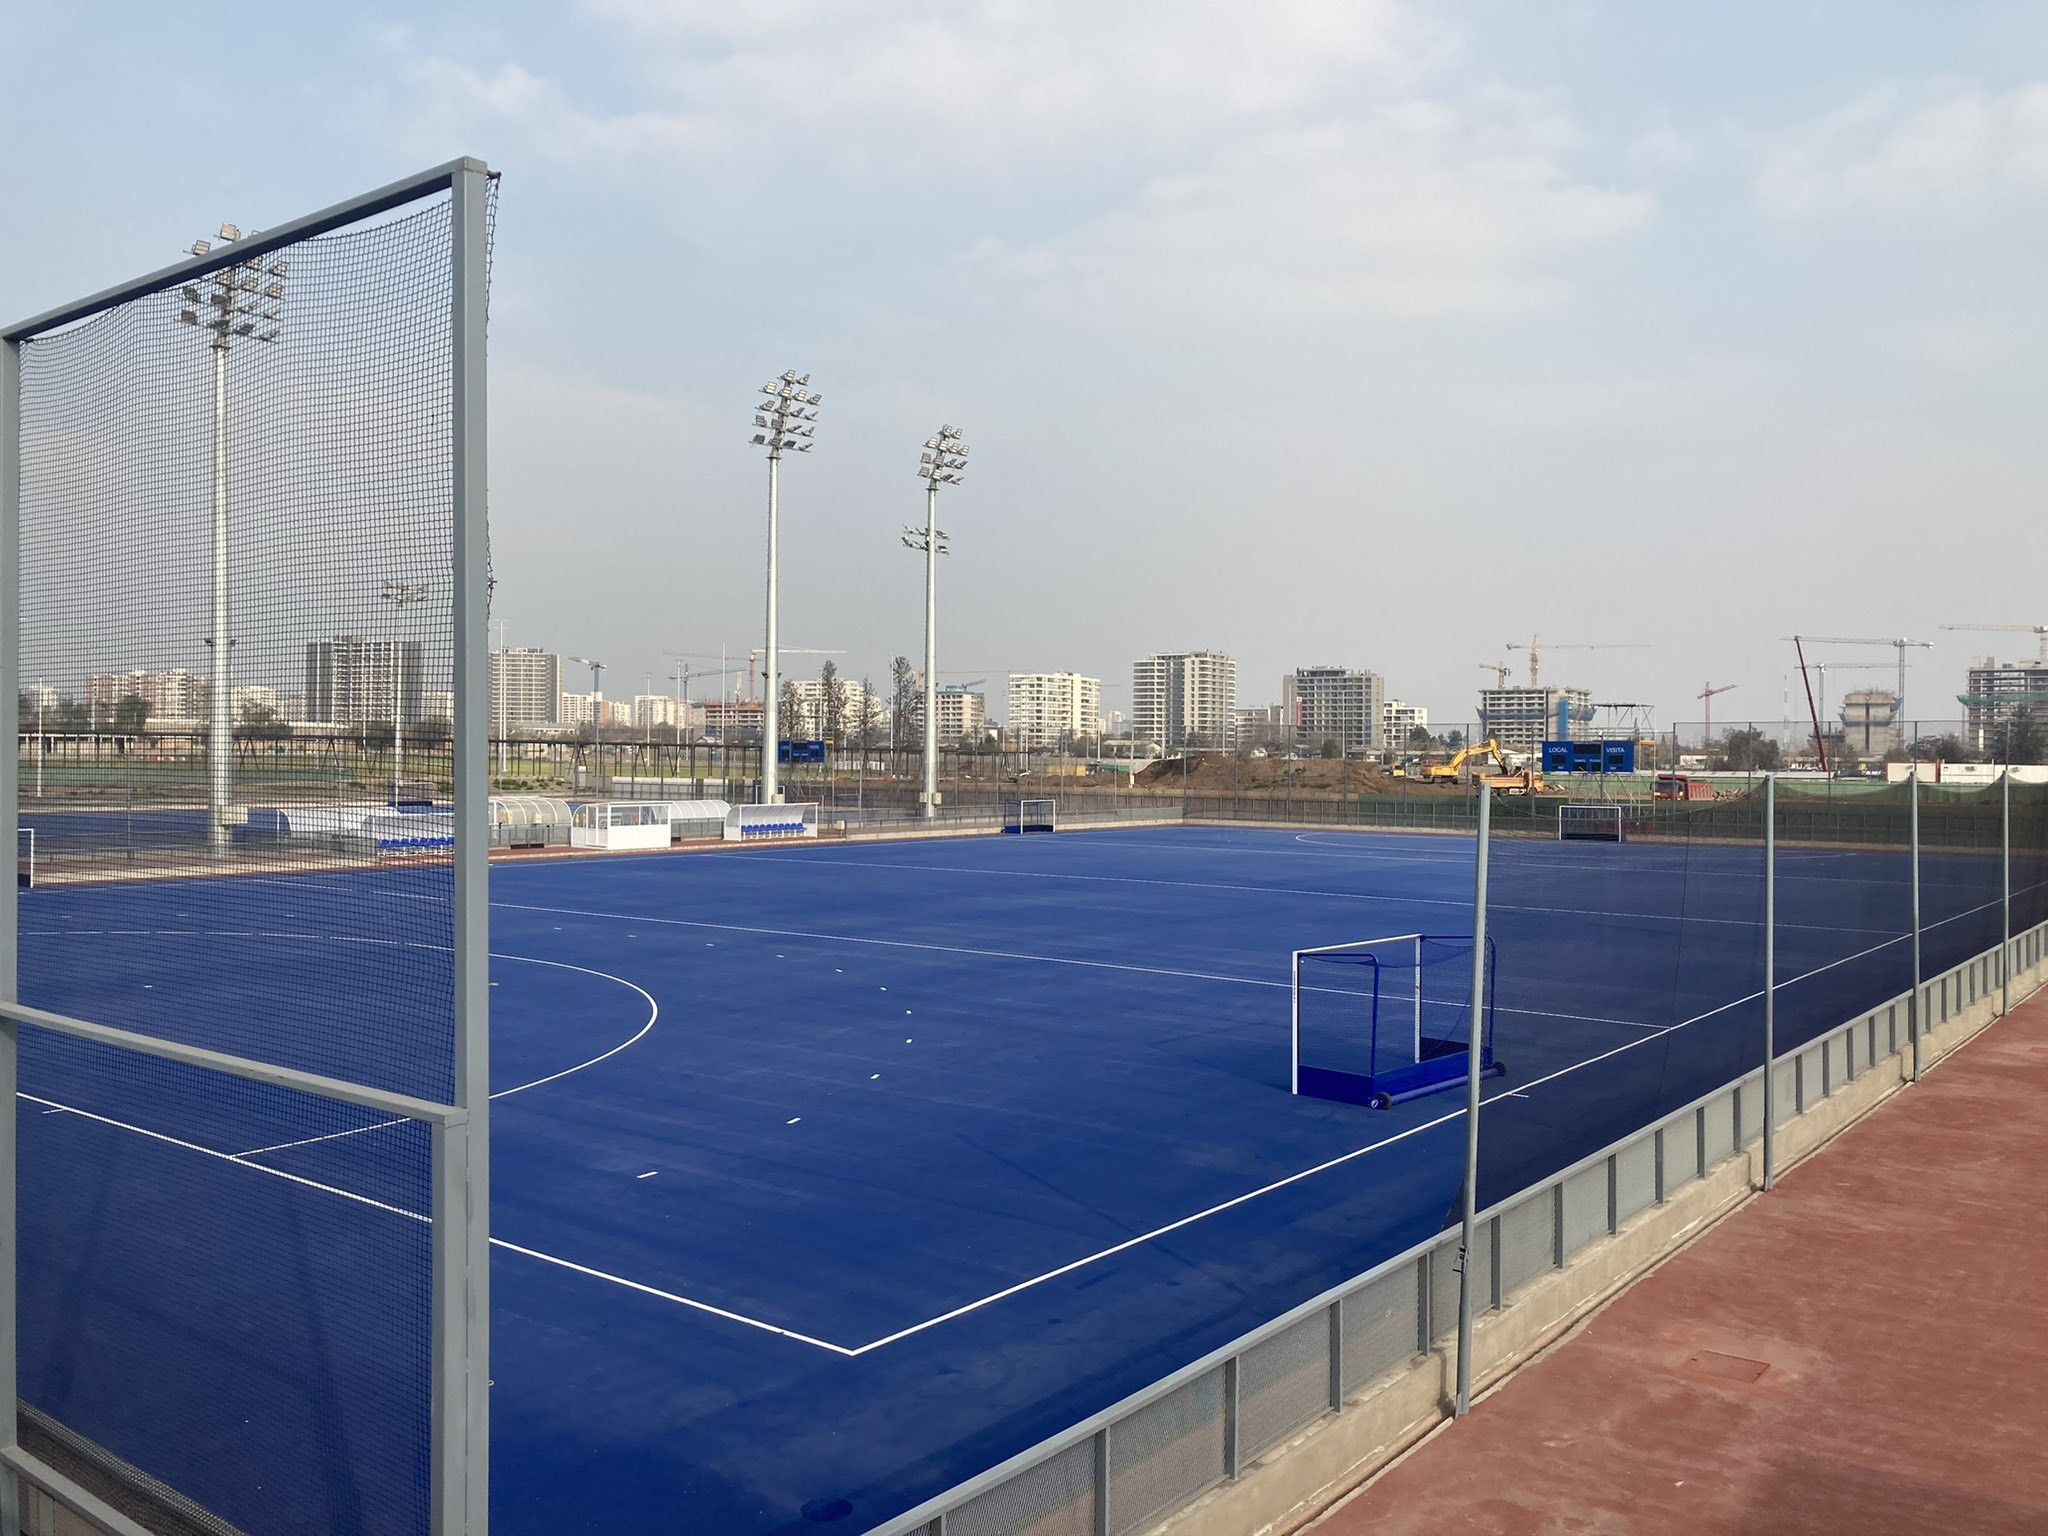 A blue surface has already been put in place at the new hockey venue ©ITG